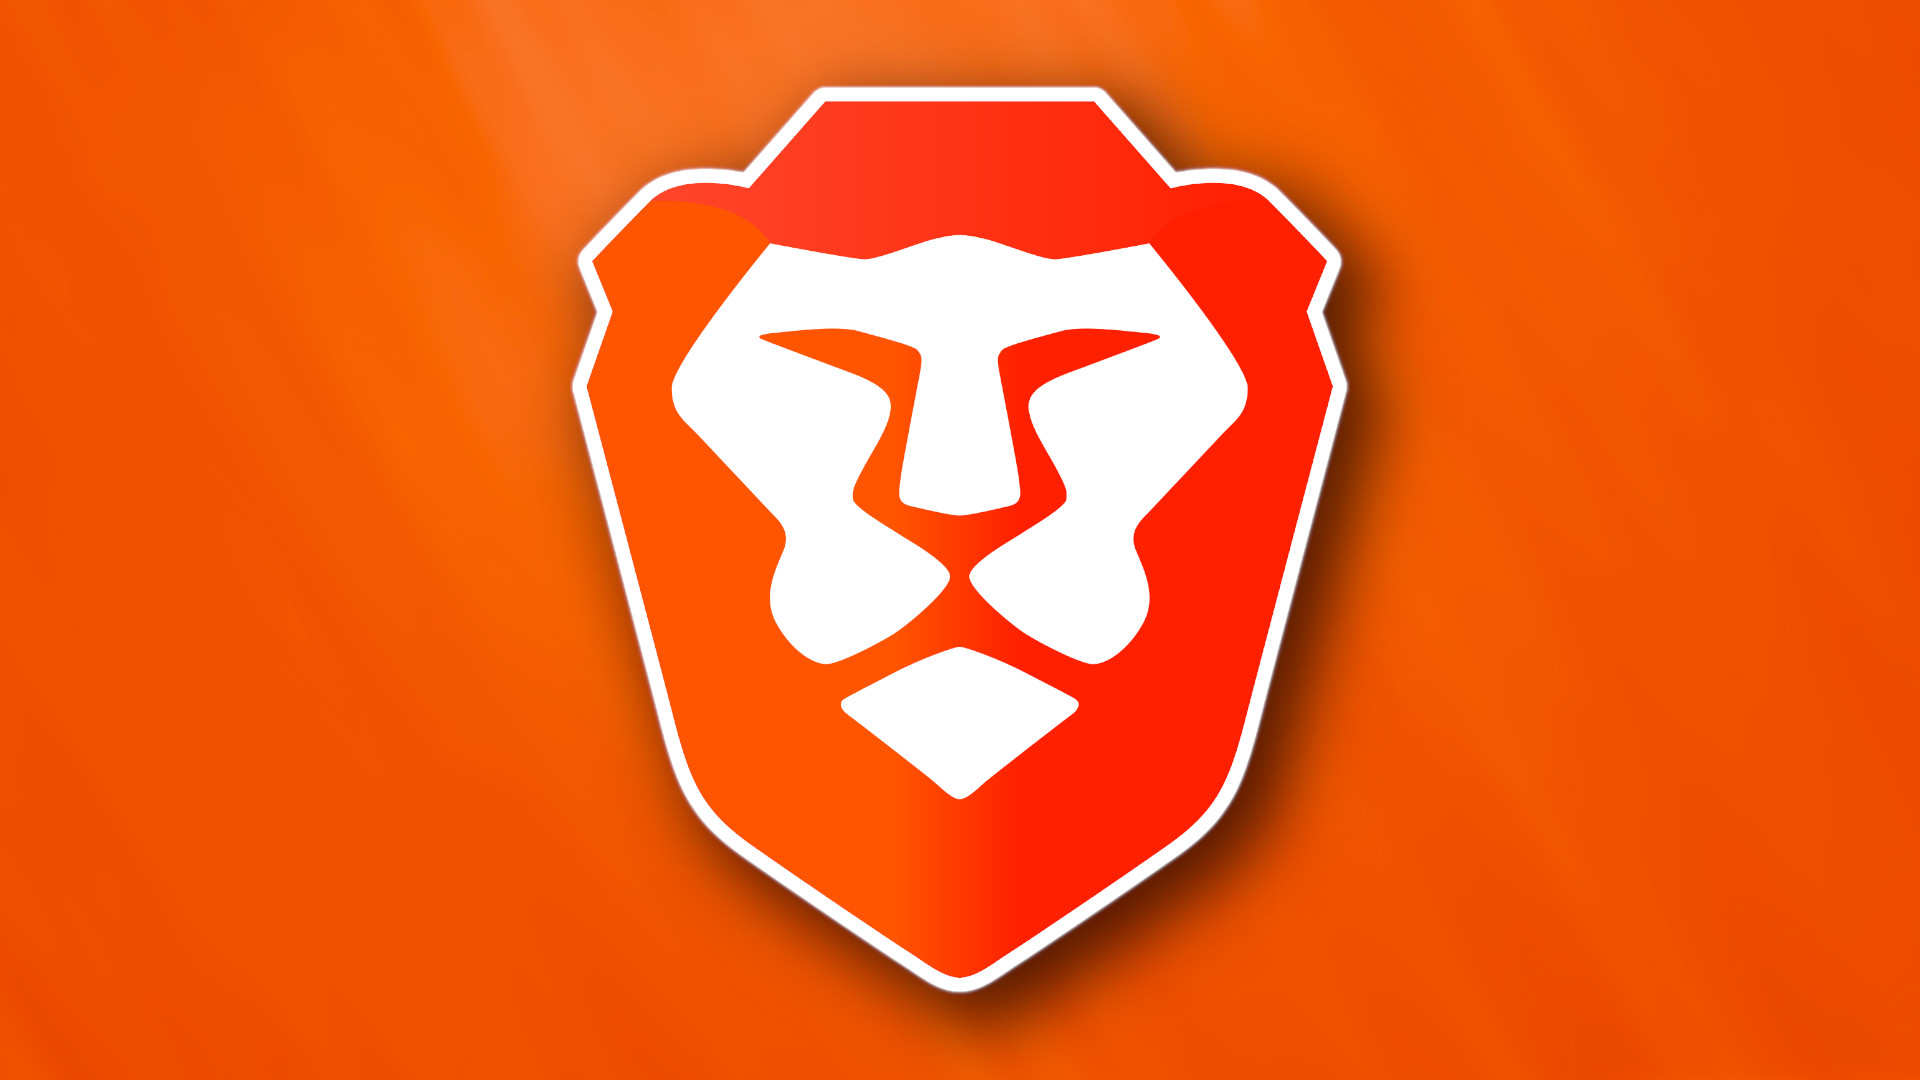 Brave browser logo on abstract background